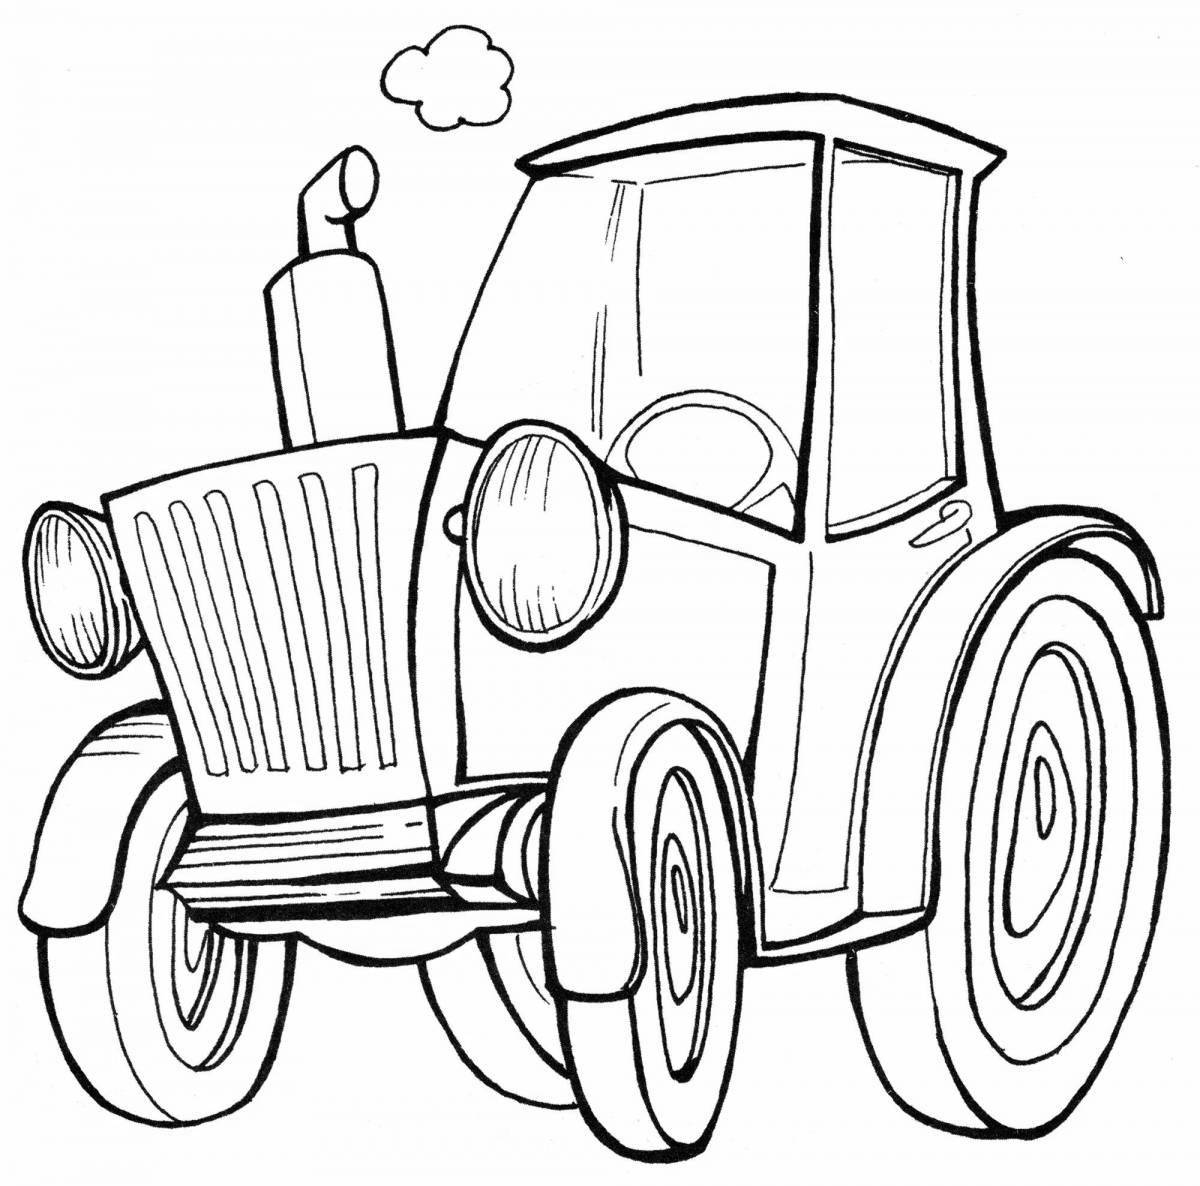 Coloring book bright blue tractor seal